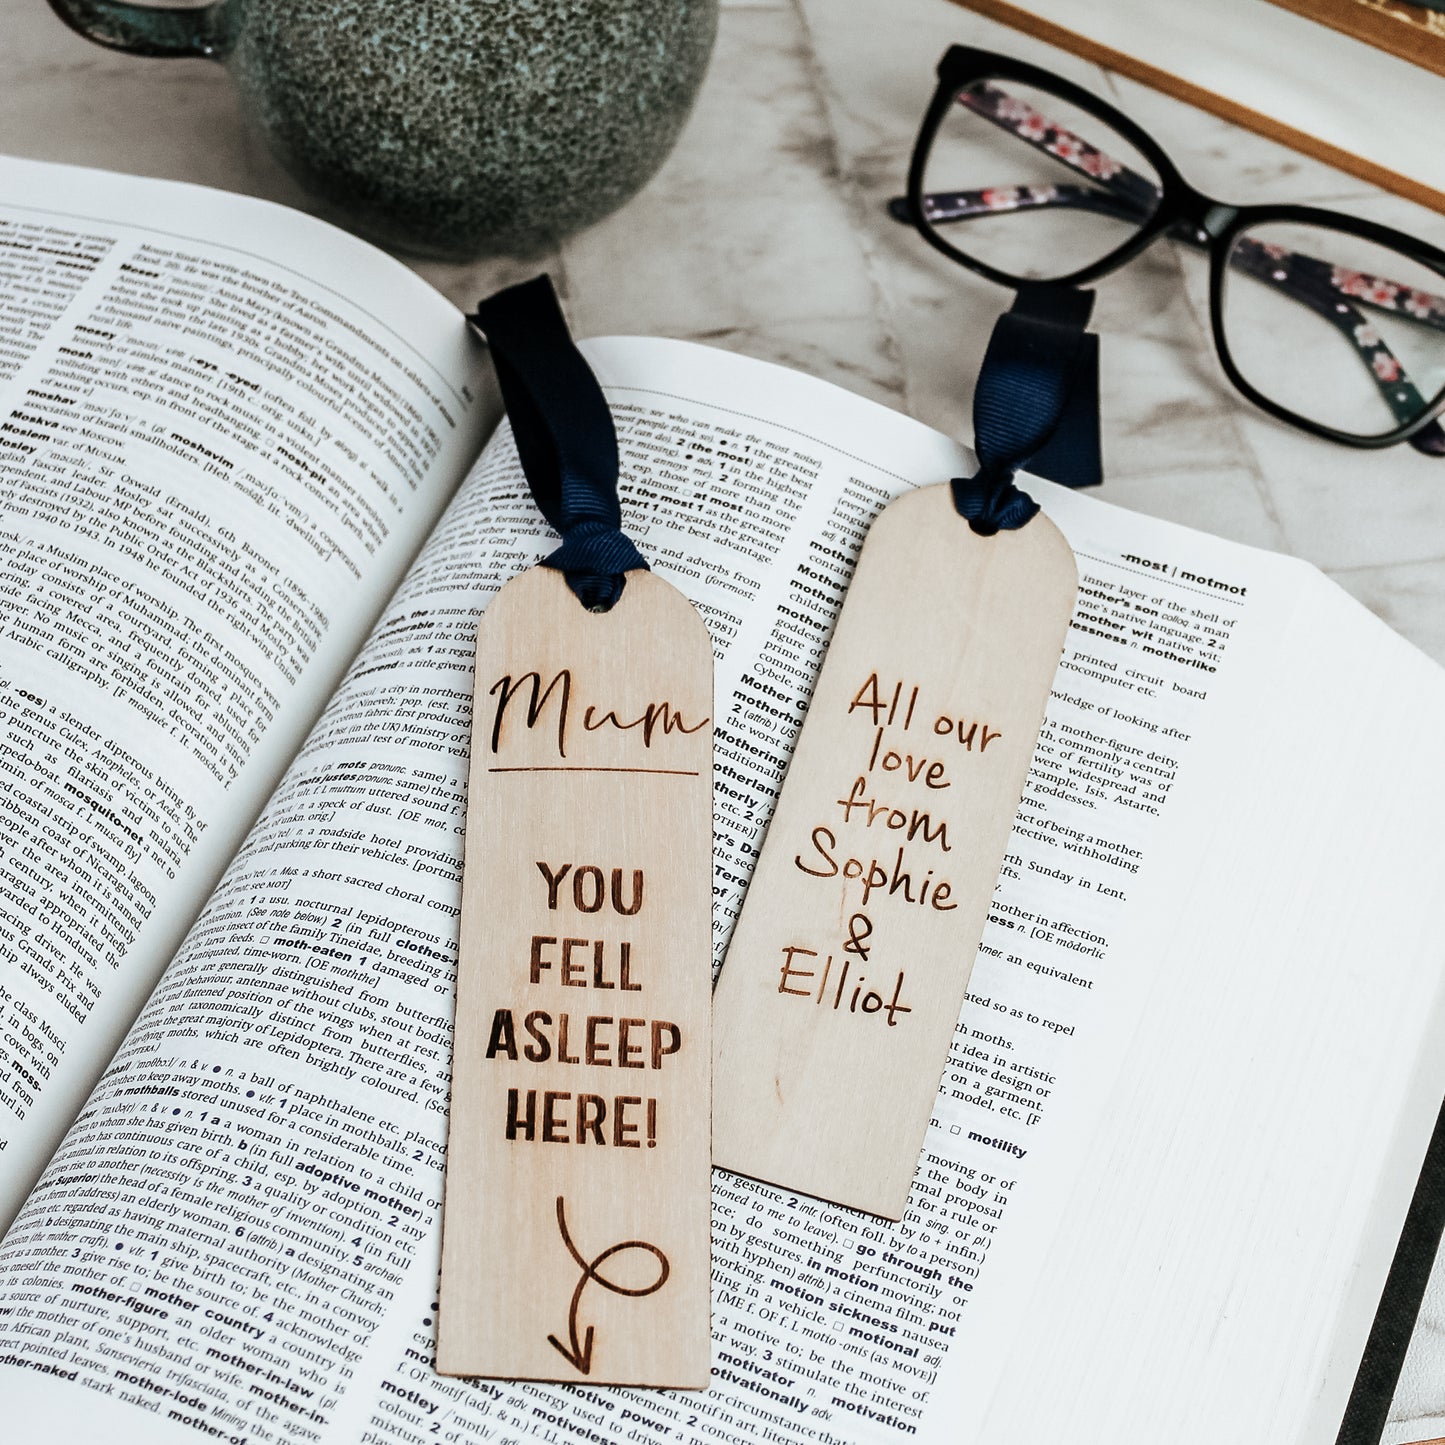 Personalised wooden bookmark engraved with "Mum, you fell asleep here" and an arrow pointing to the bottom. The bookmark rests on an open book with a navy blue ribbon attached.